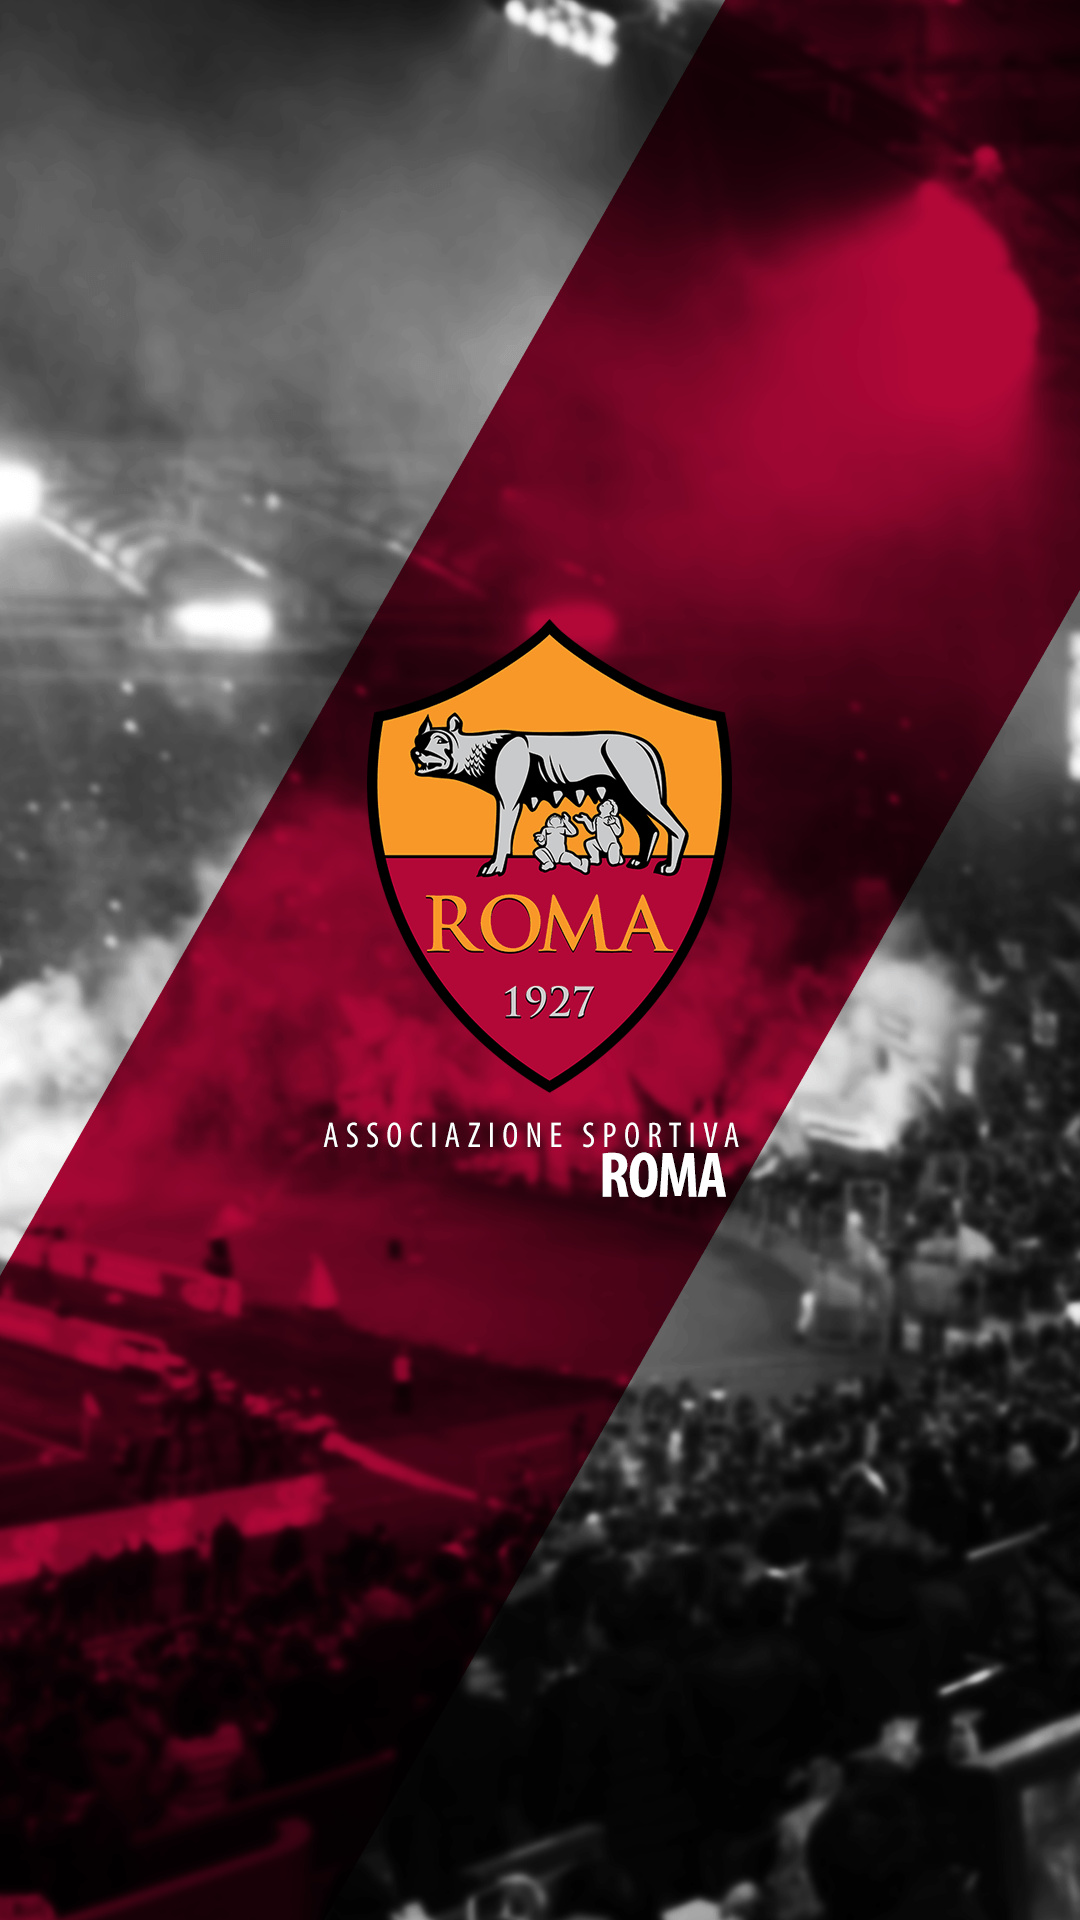 AS Roma wallpapers, Stylish design, Multifunctional devices, Stunning visuals, 1080x1920 Full HD Handy